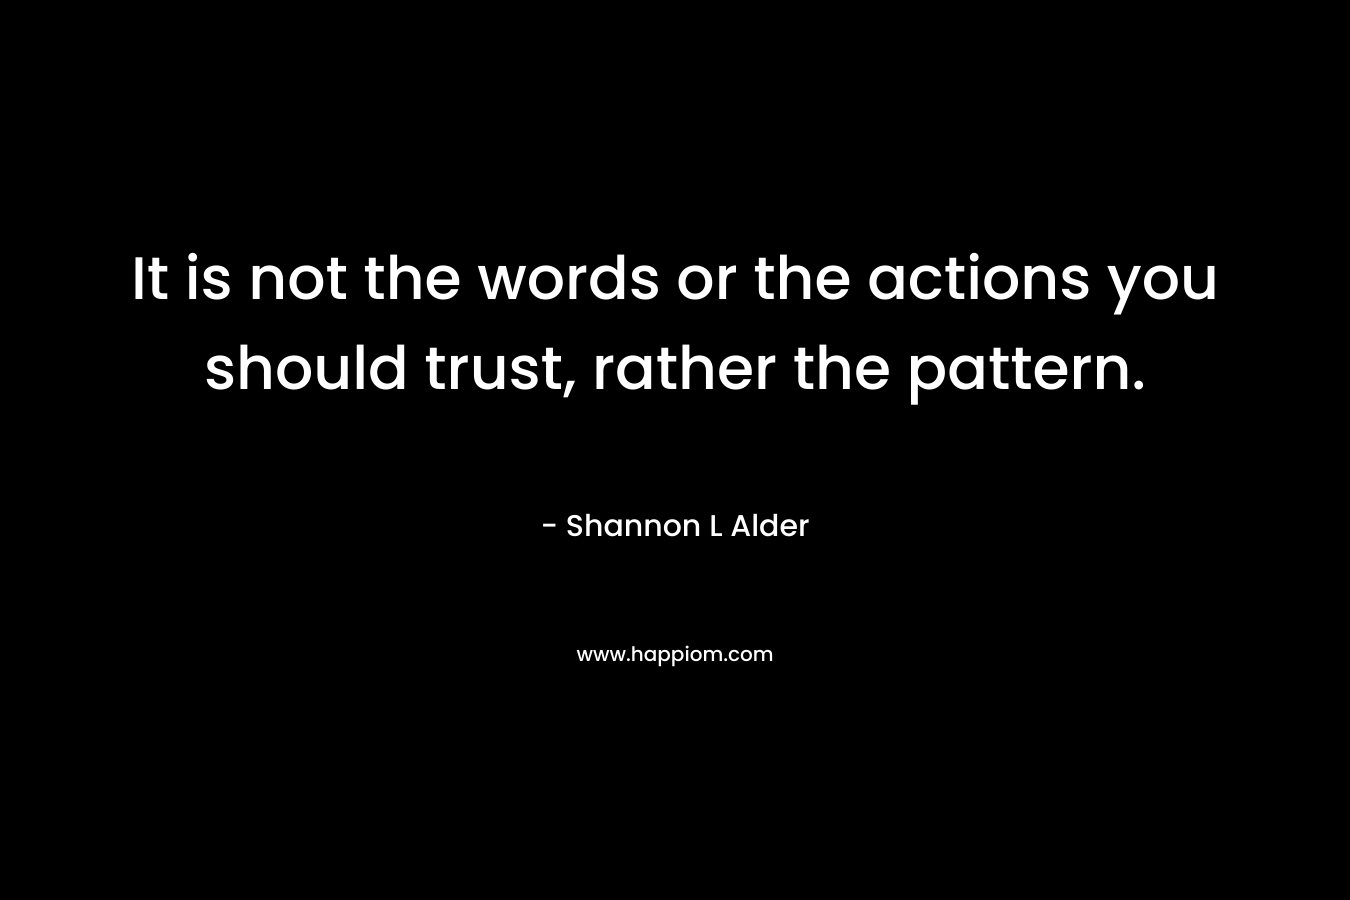 It is not the words or the actions you should trust, rather the pattern.